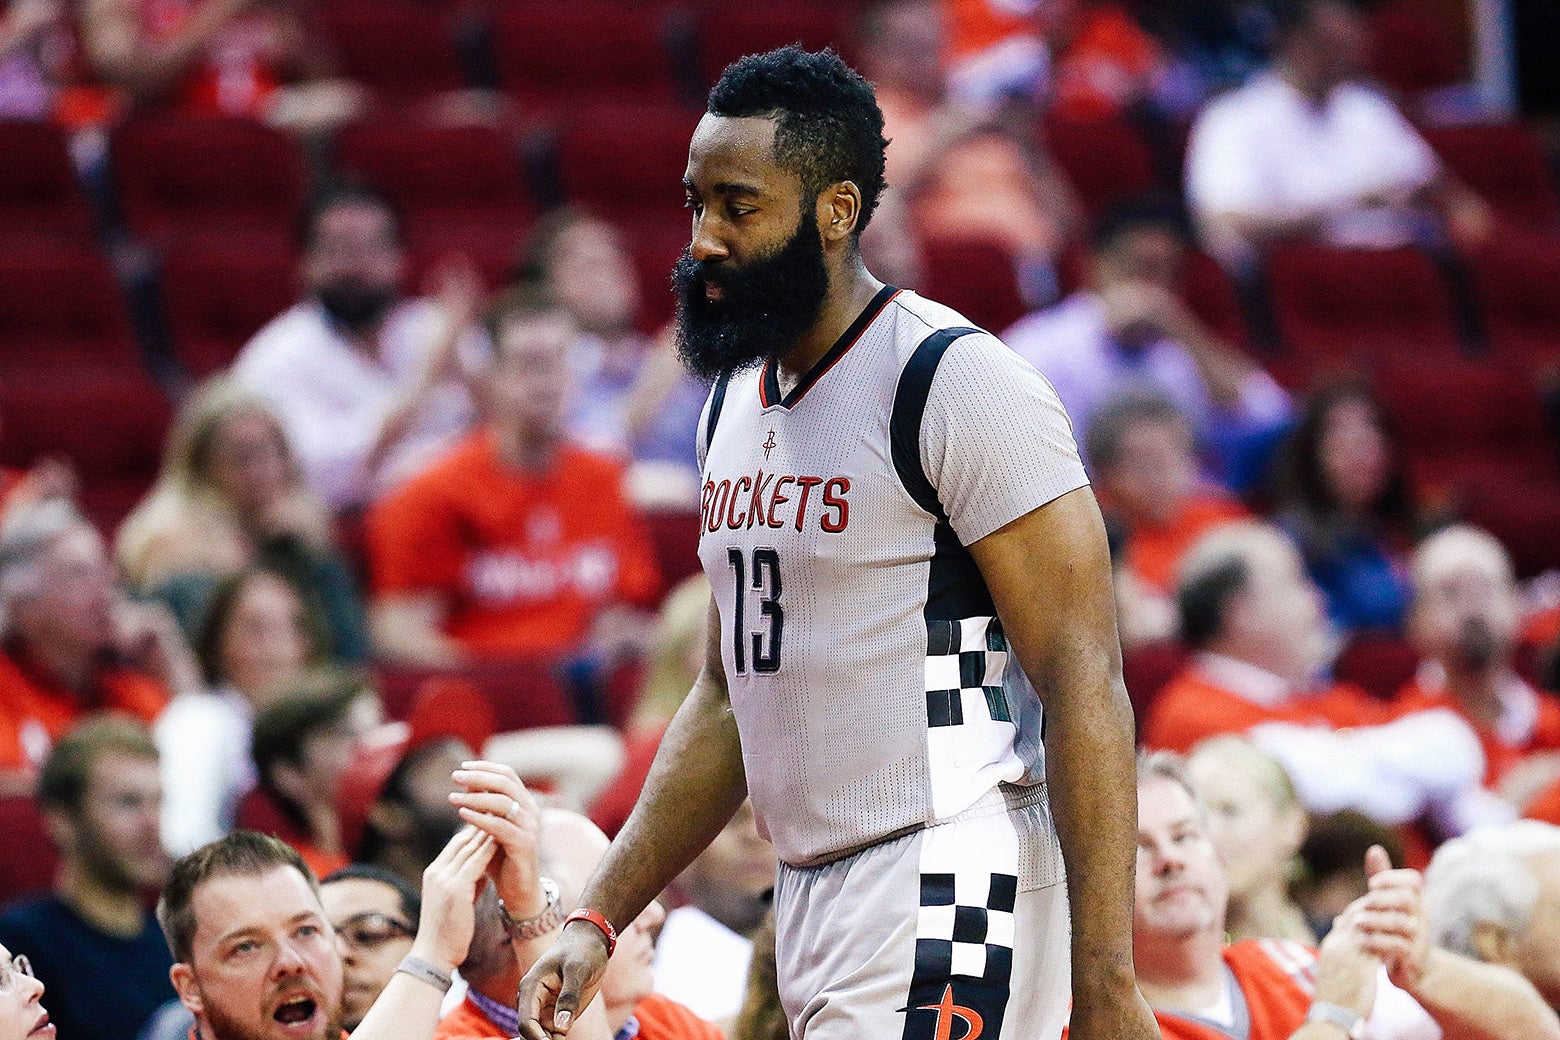 James Harden of the Houston Rockets reacts against the San Antonio Spurs during Game 6 of the NBA Western Conference semifinals at Toyota Center on May 11, 2017, in Houston.